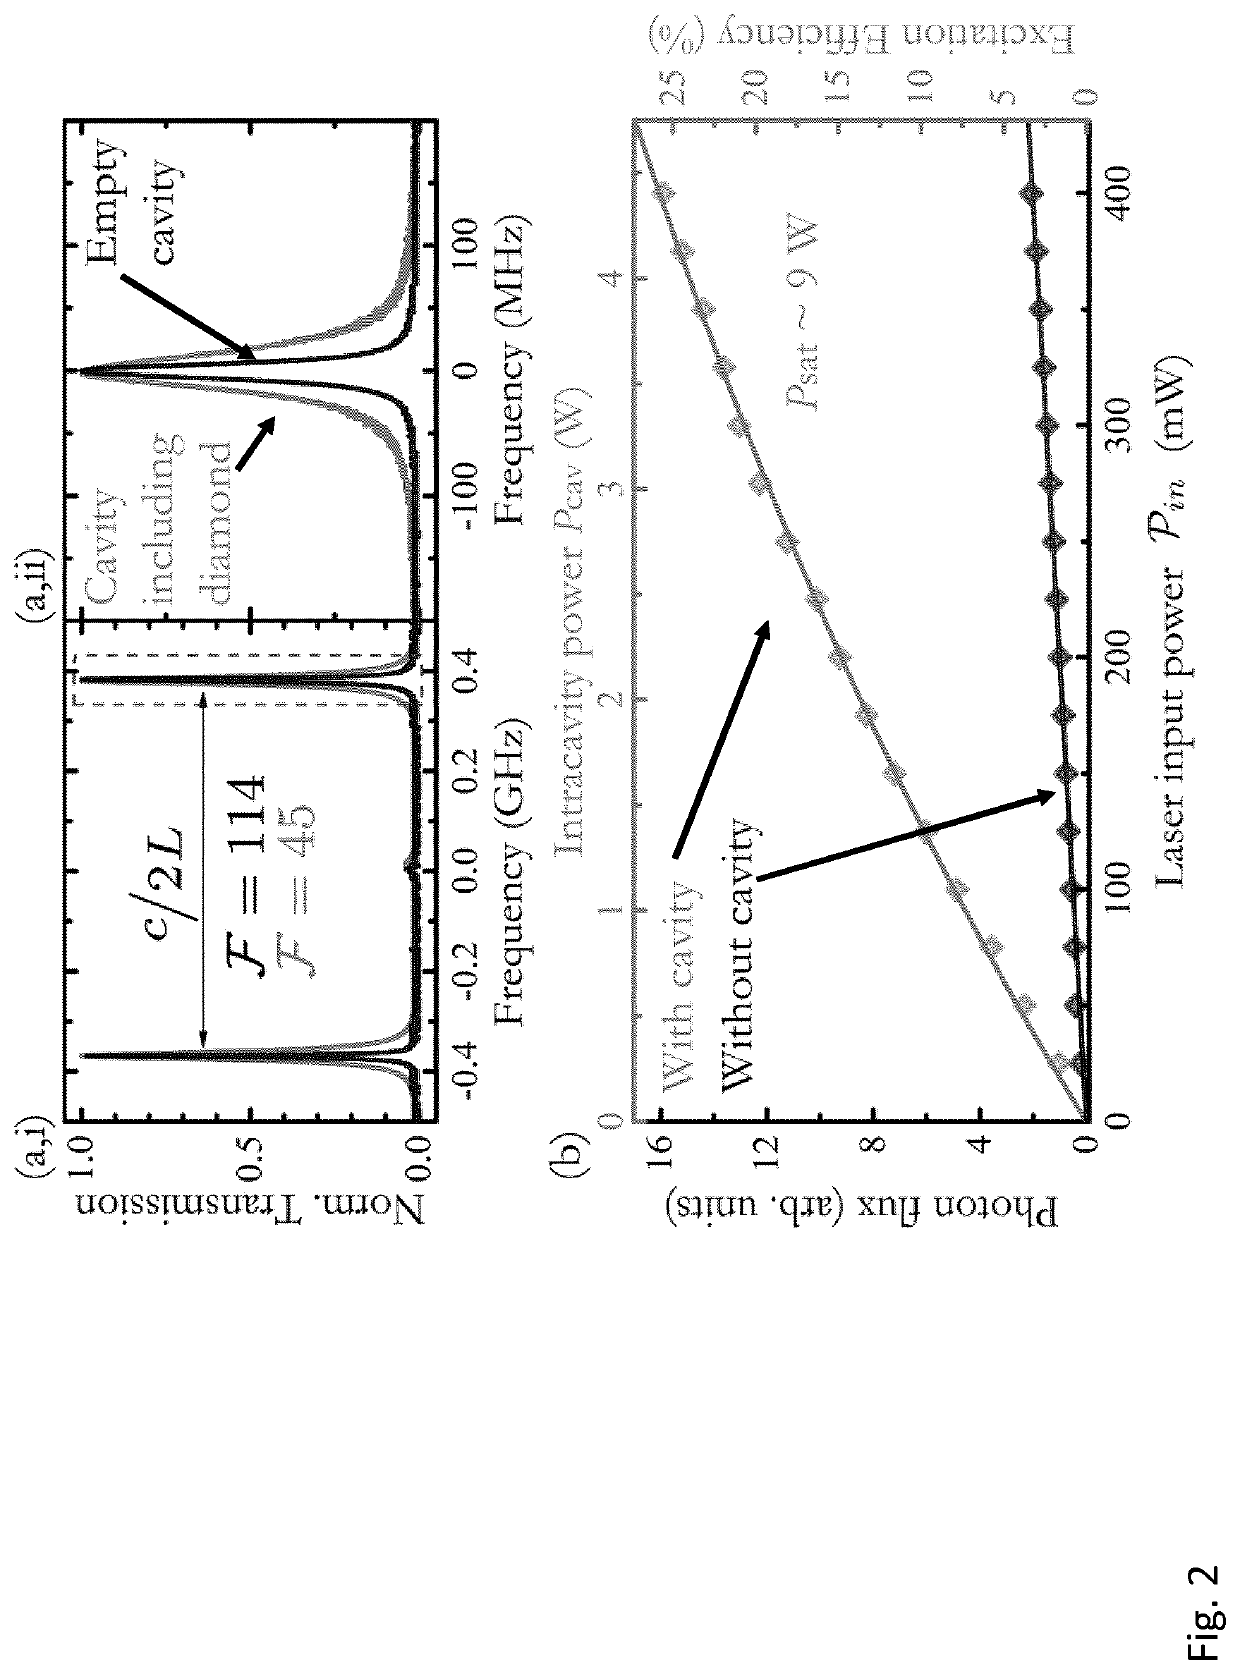 A magnetometer using optically active defects in a solid state material